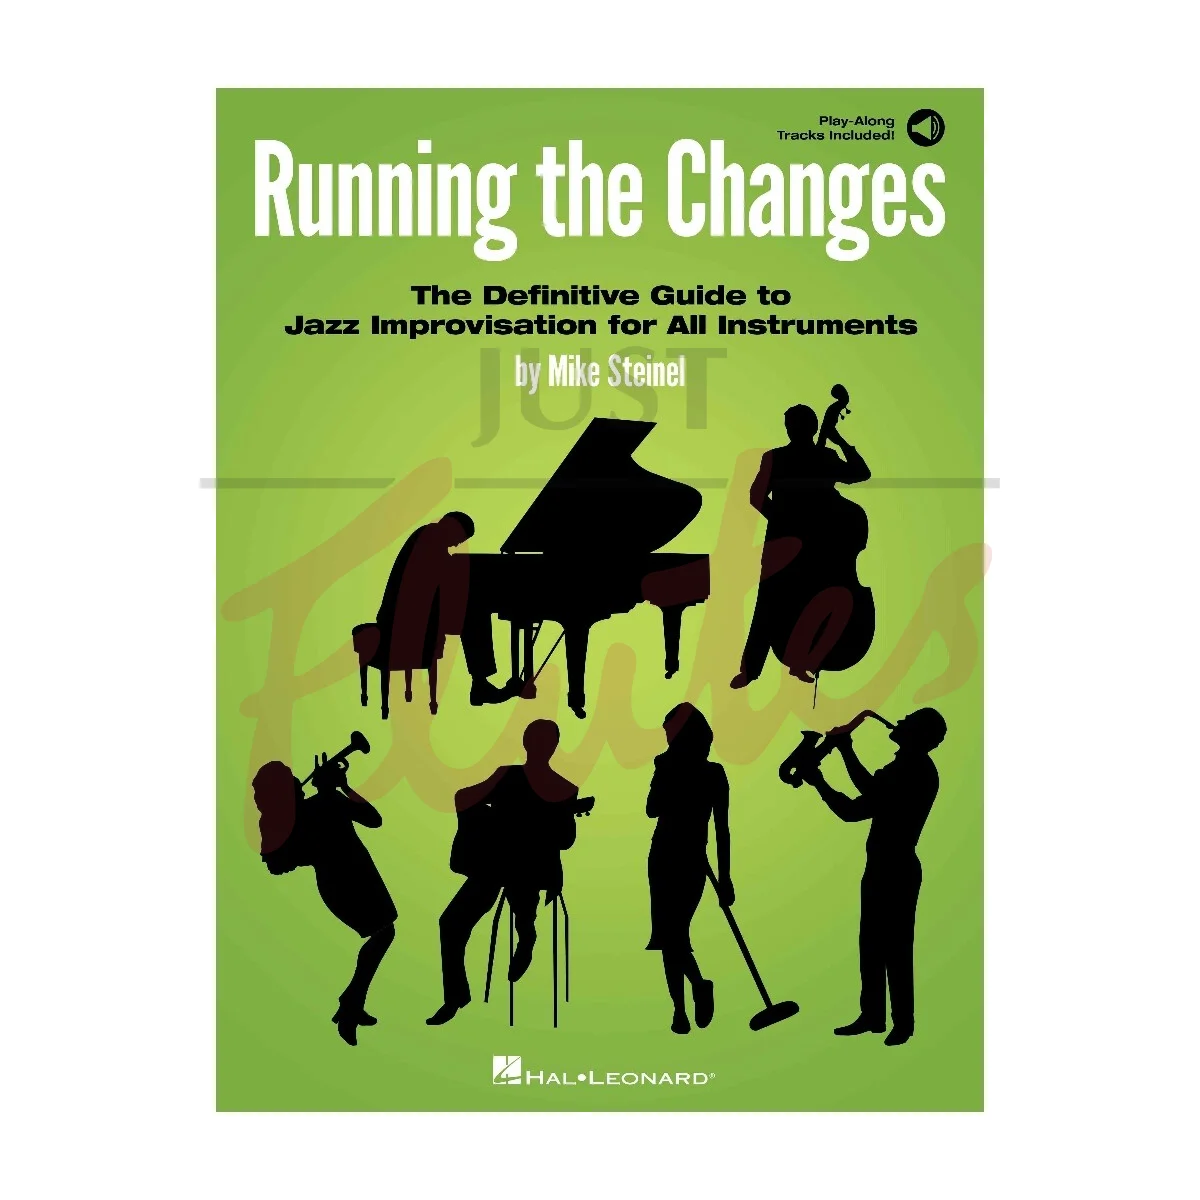 Running the Changes: The Definitive Guide to Jazz Improvisation for All Instruments